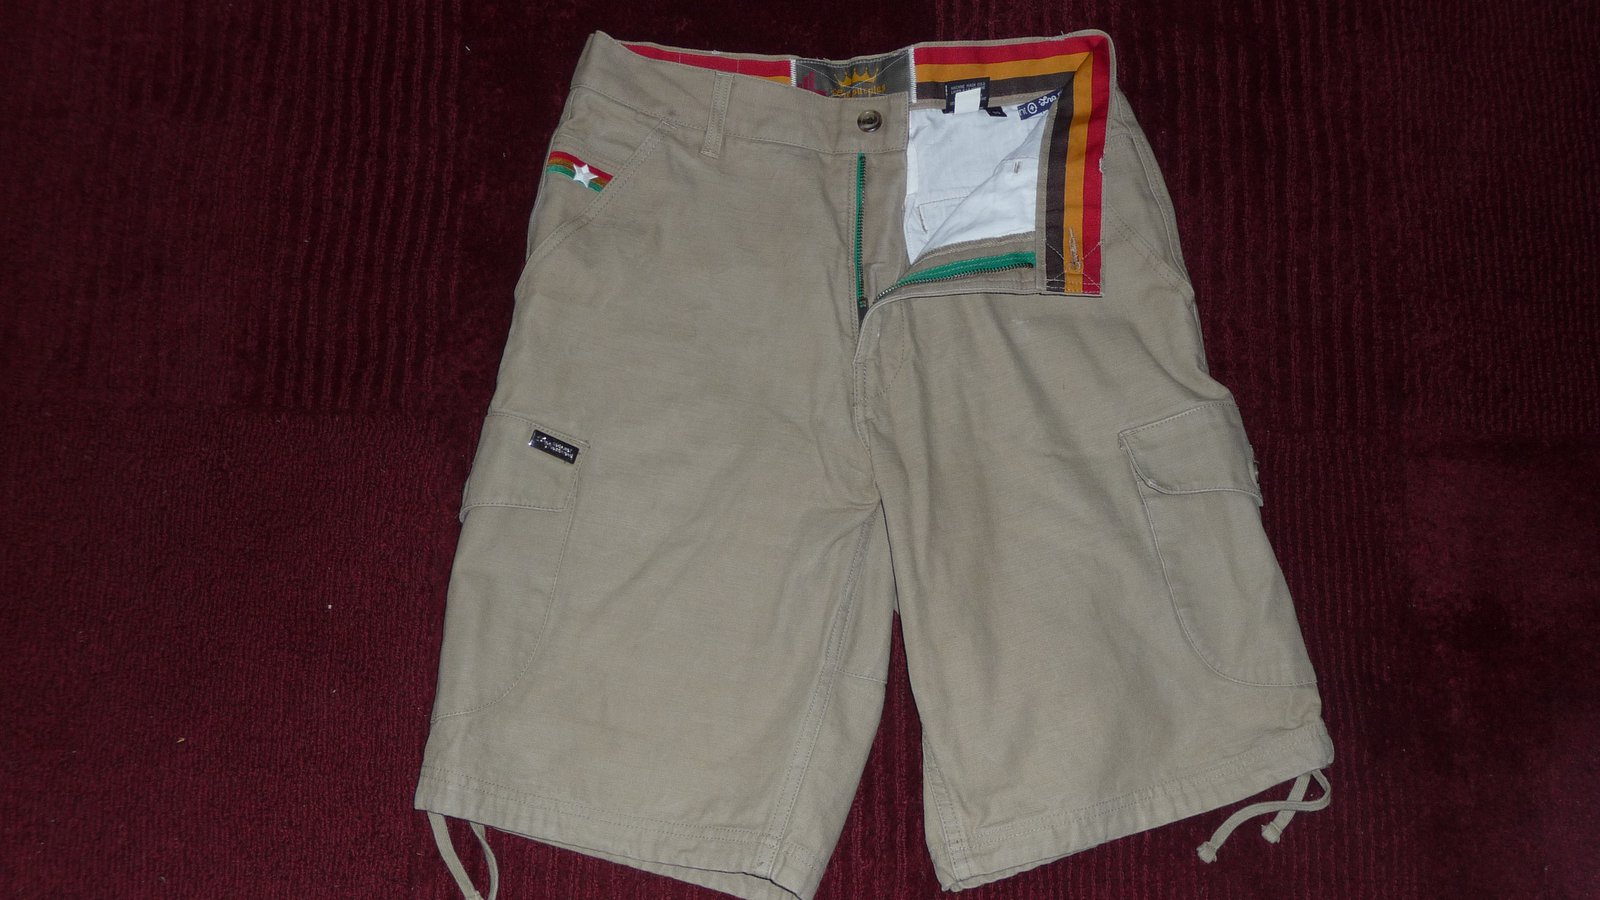 Lrg shorts for sale